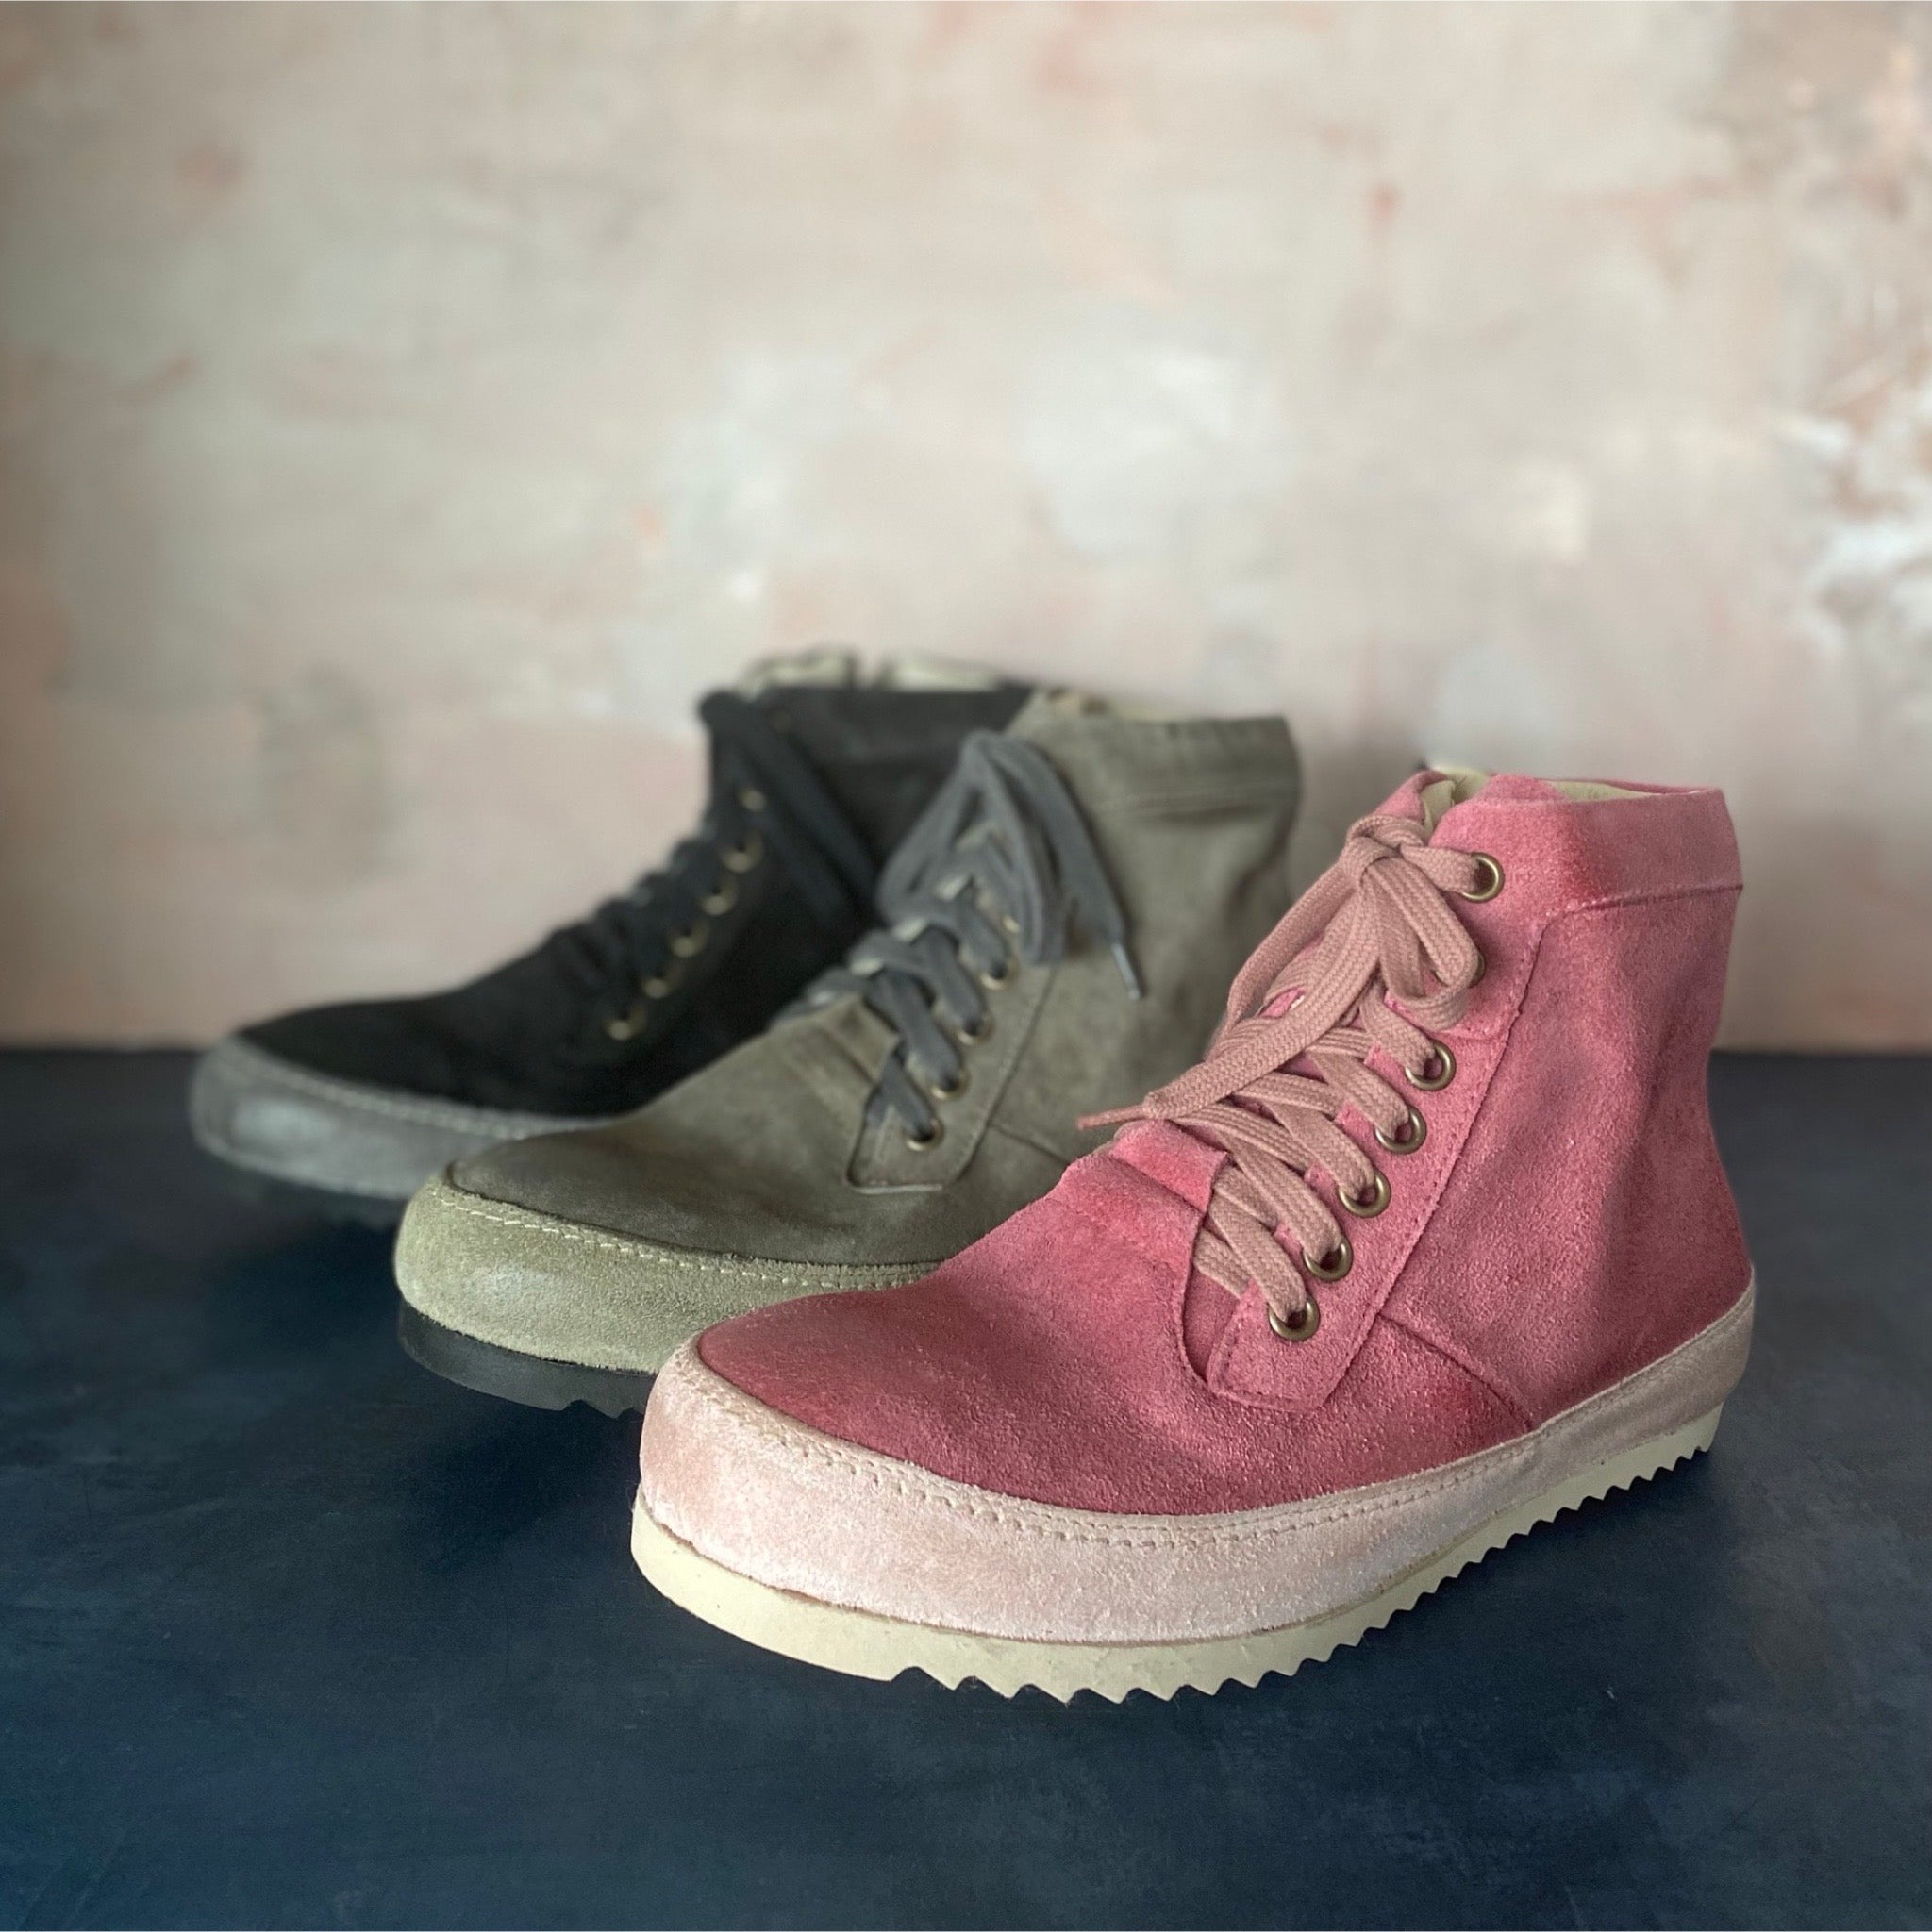 Victoria Varrasso Sportiva Two Tone Washed Suede Hightops